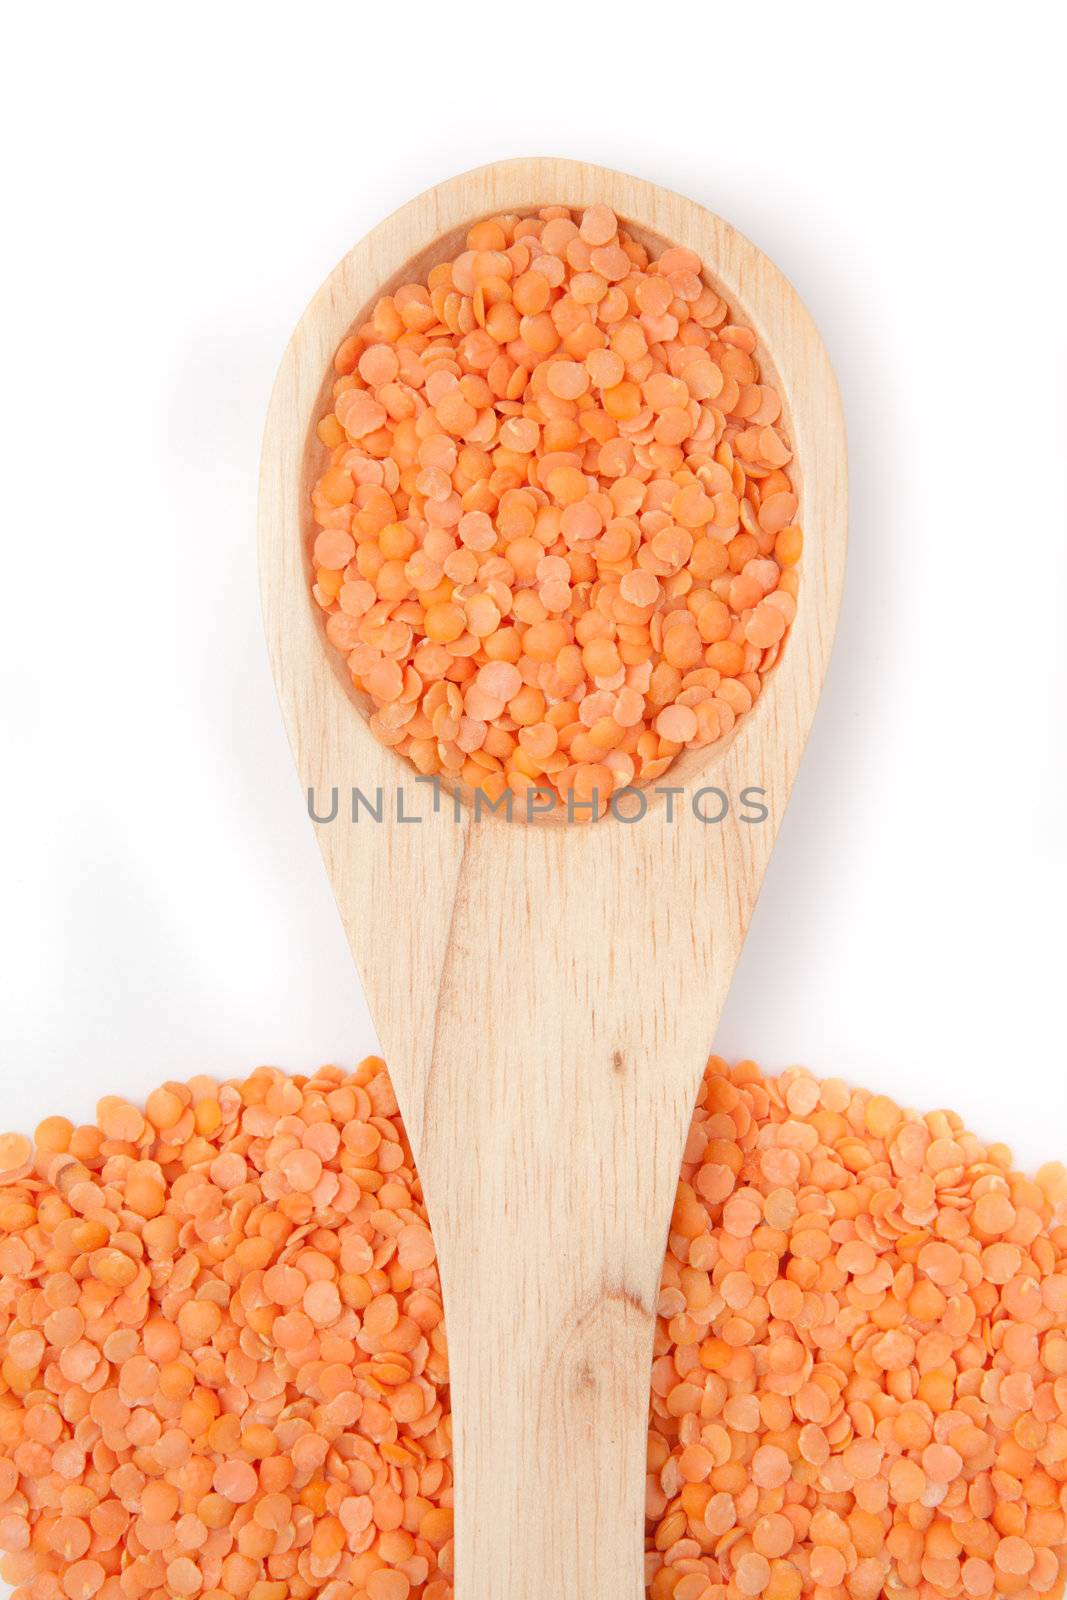 Wooden spoon with lentils against a white background